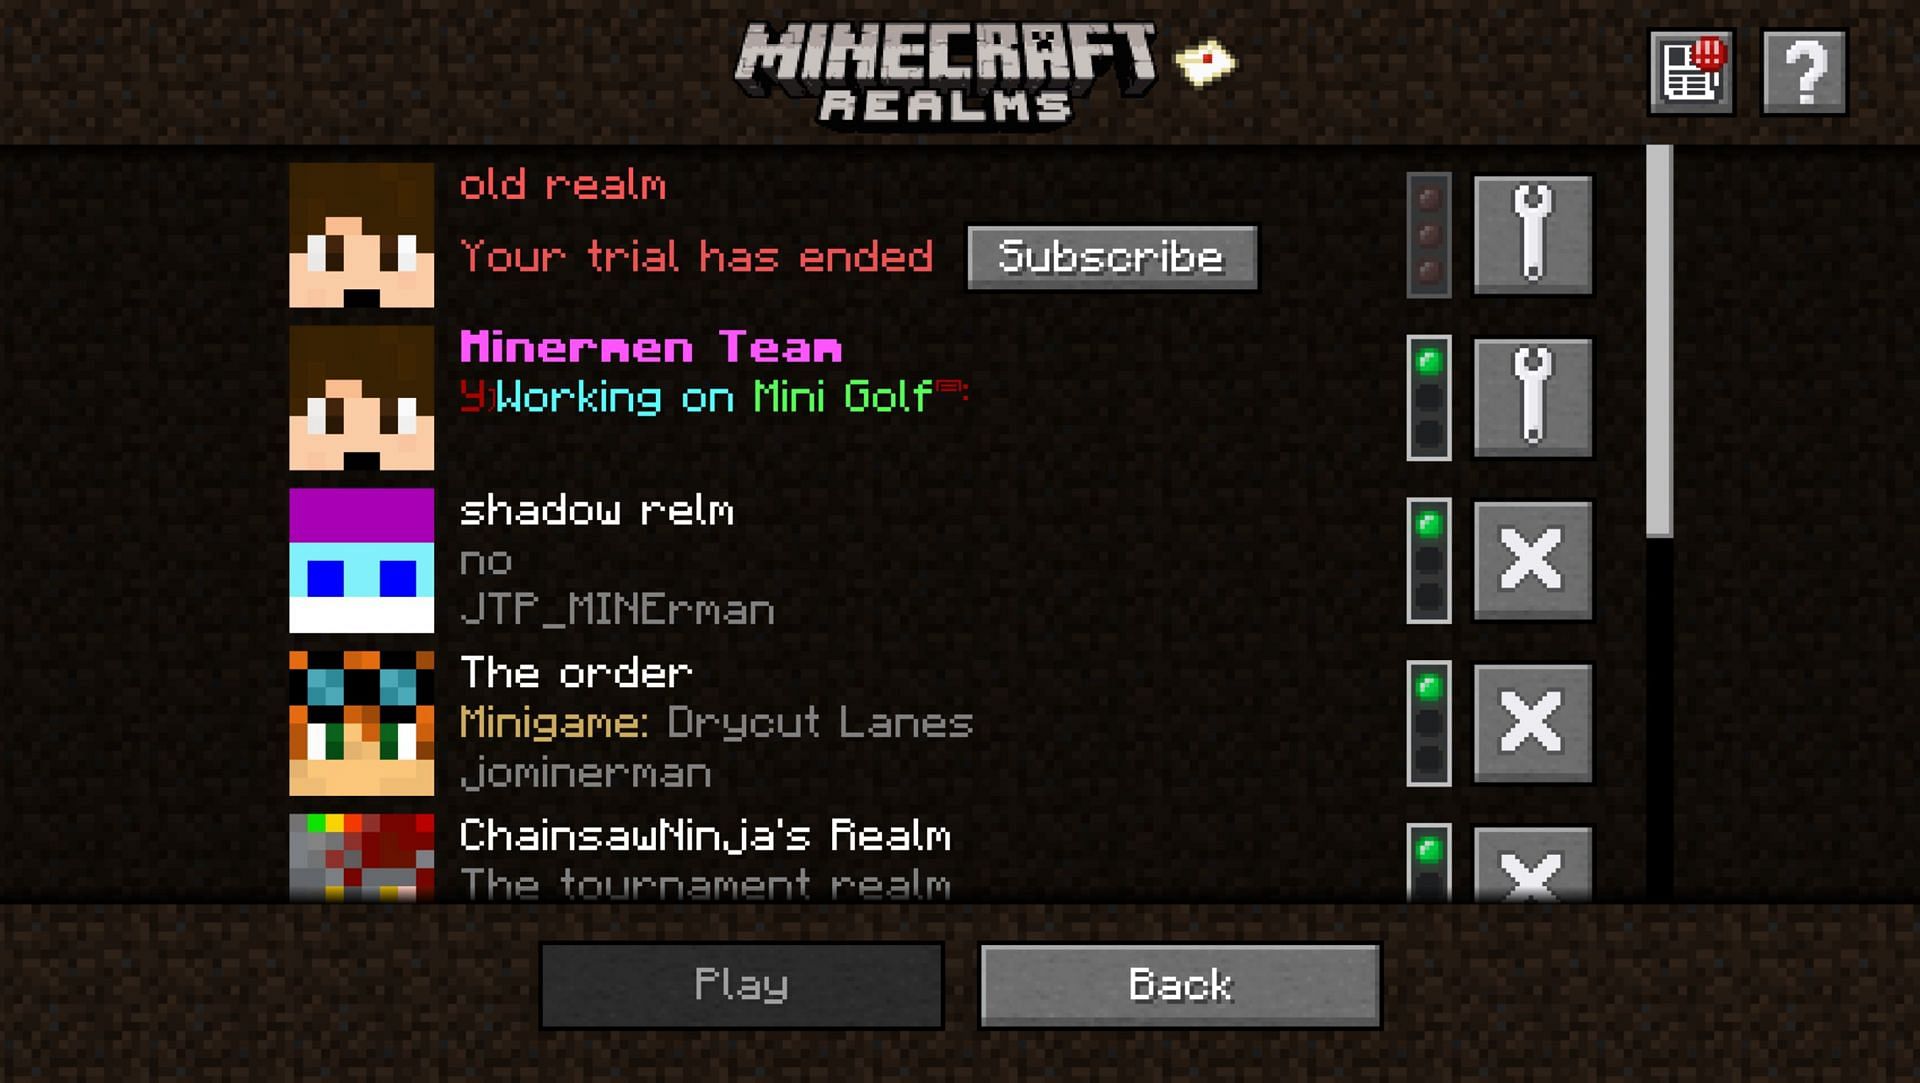 Loading of the Minecraft Realms menu has been accelerated (Image via Mojang)